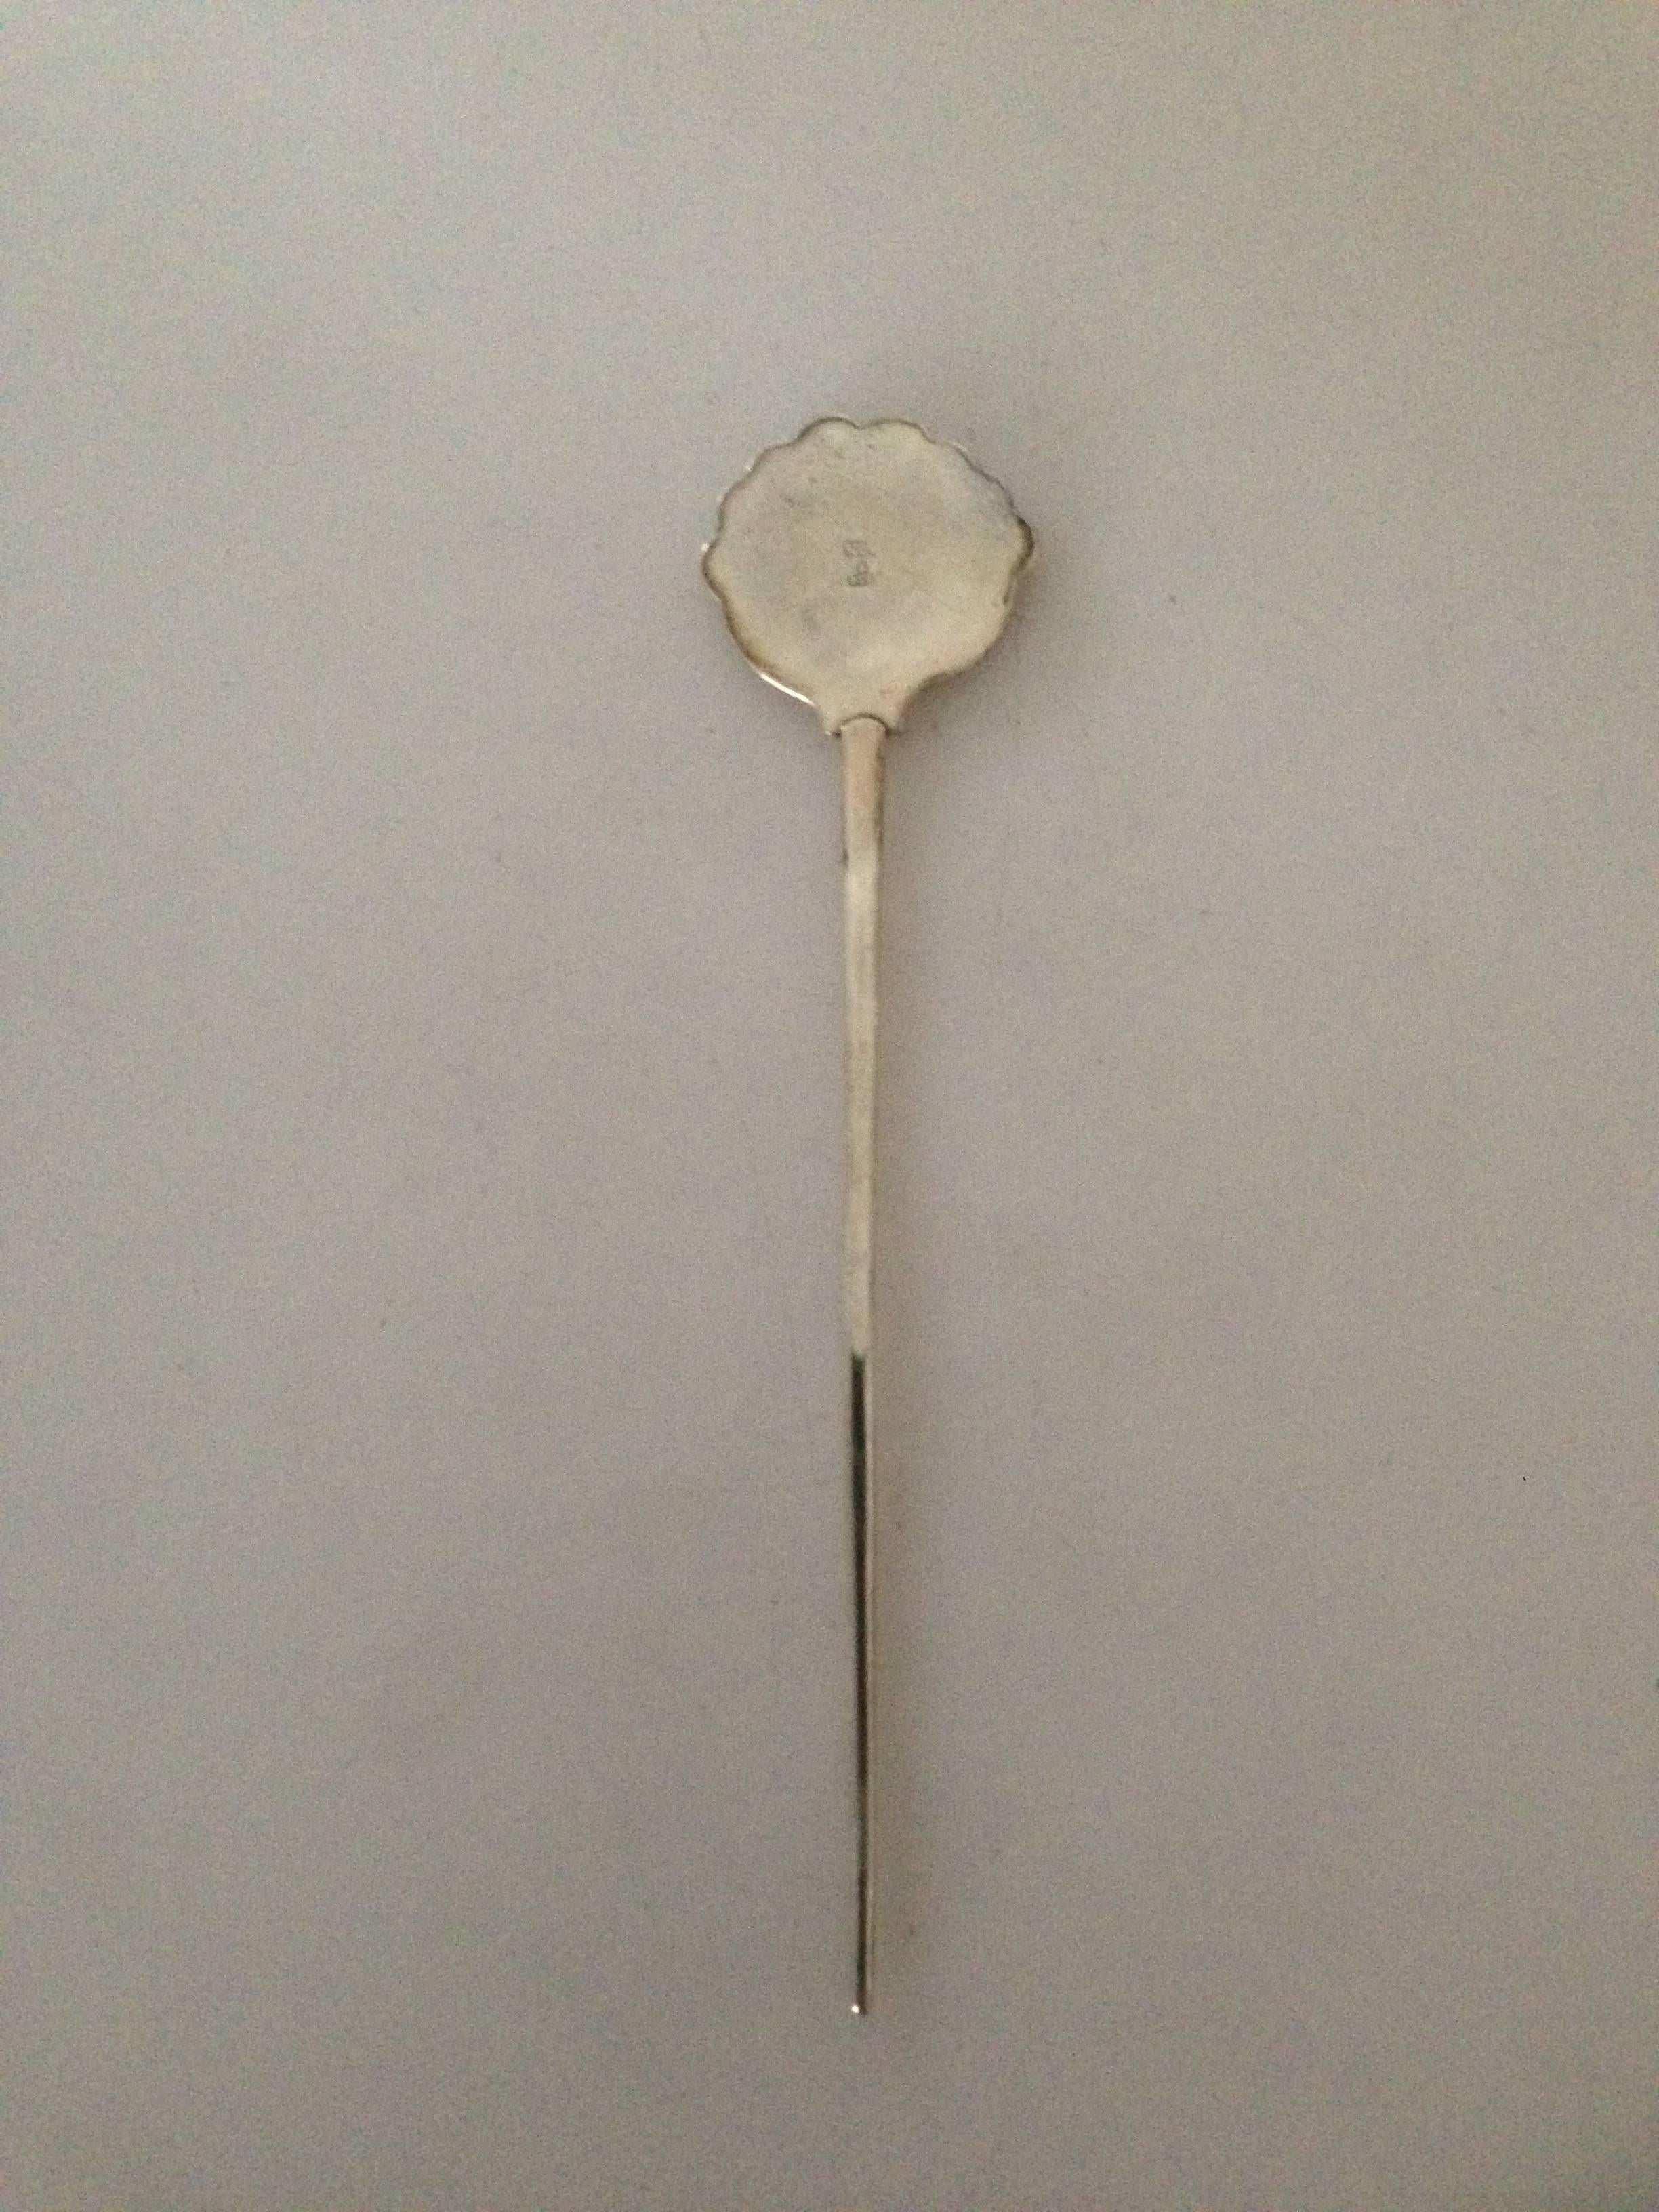 Mogens Ballin silver hair pin/needle with mother-of-pearl. Measures 17cm and is in good condition, except for a crack in the mother-of-pearl.